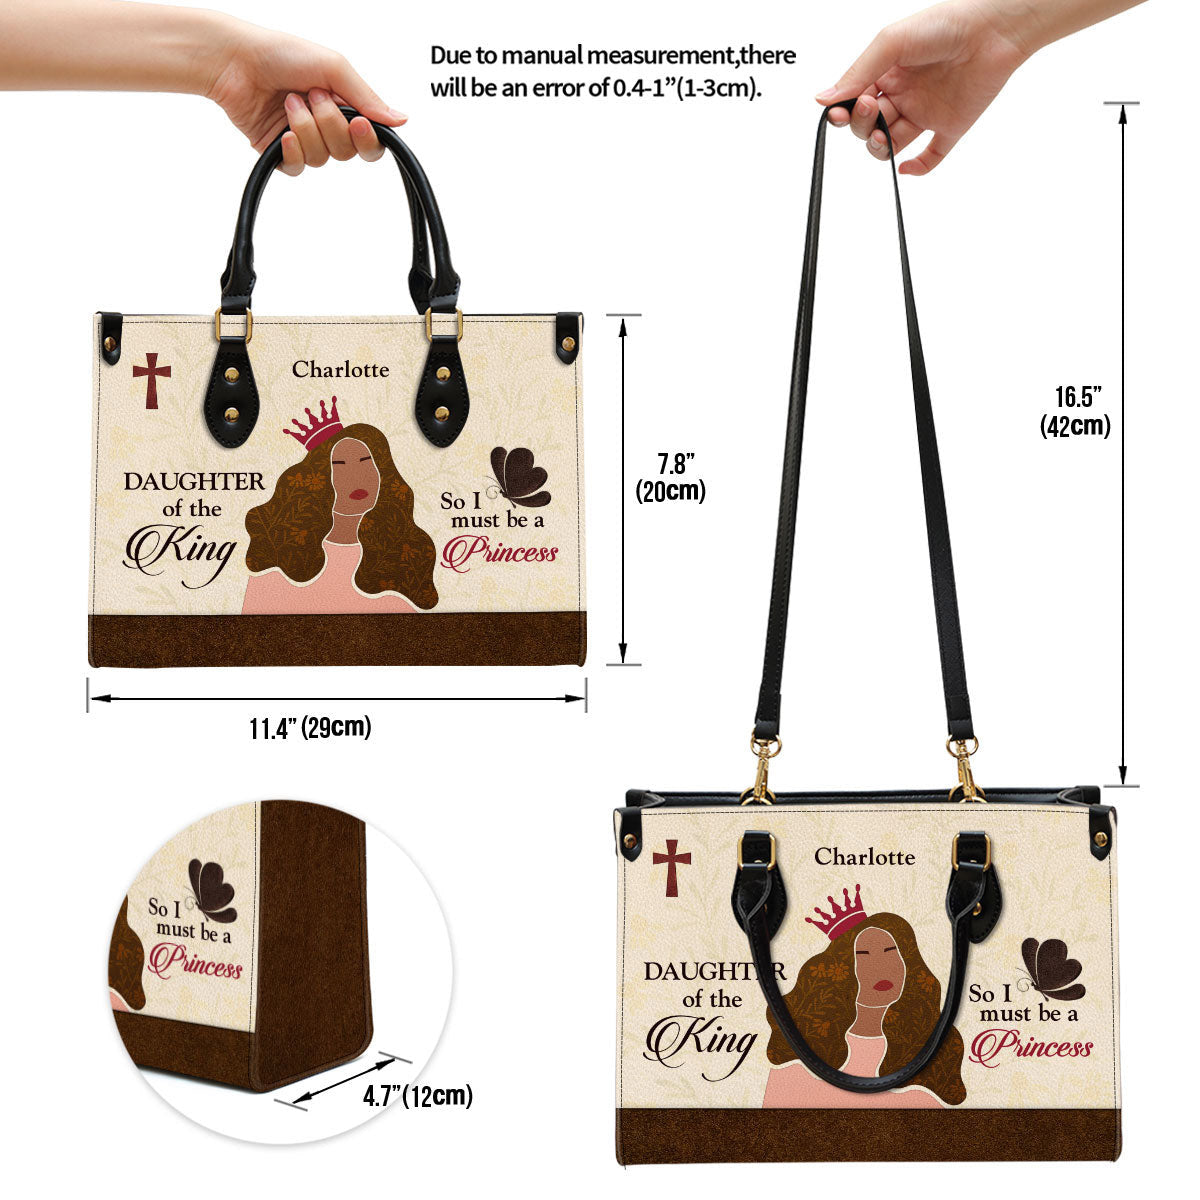 Scripture Gifts For Religious Women Personalized Leather Handbag With Handle Daughter Of The King